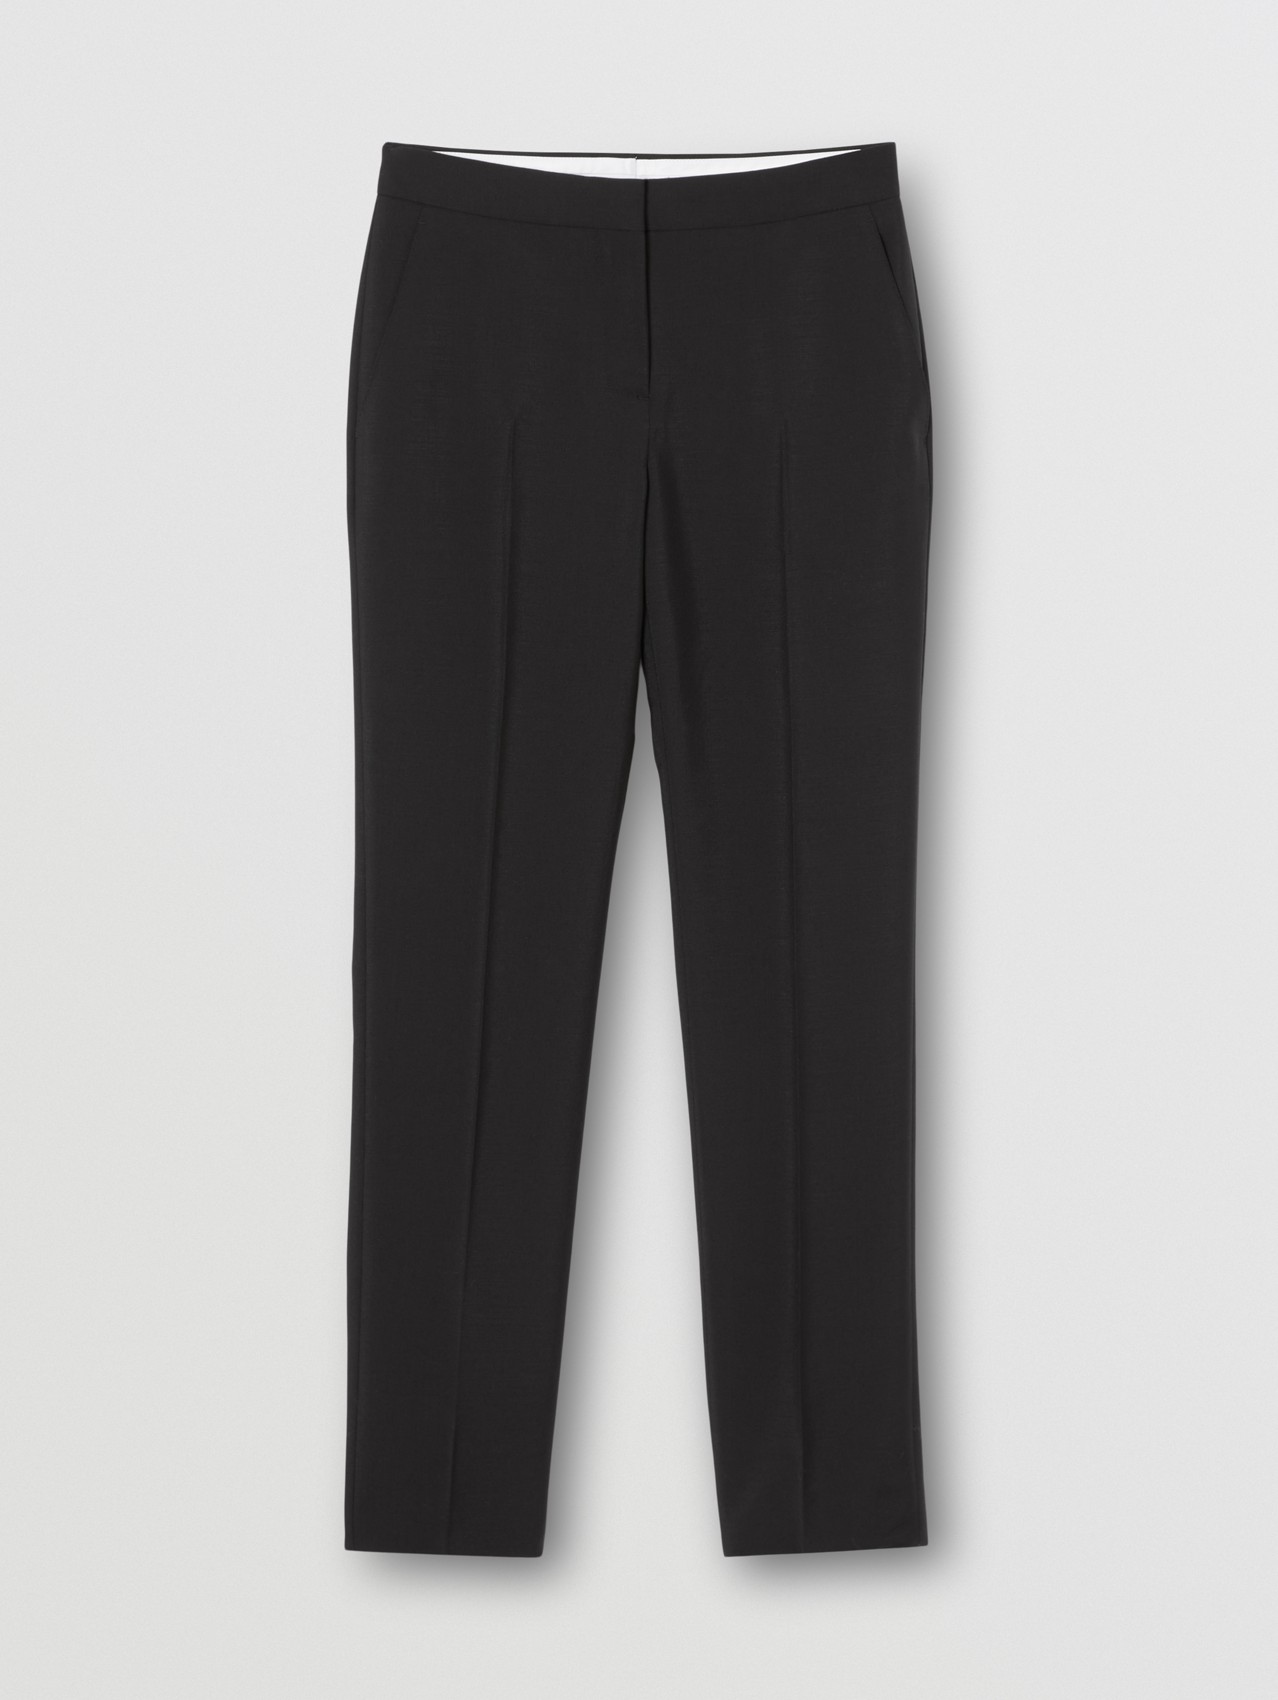 Mohair Wool Tailored Trousers in Black